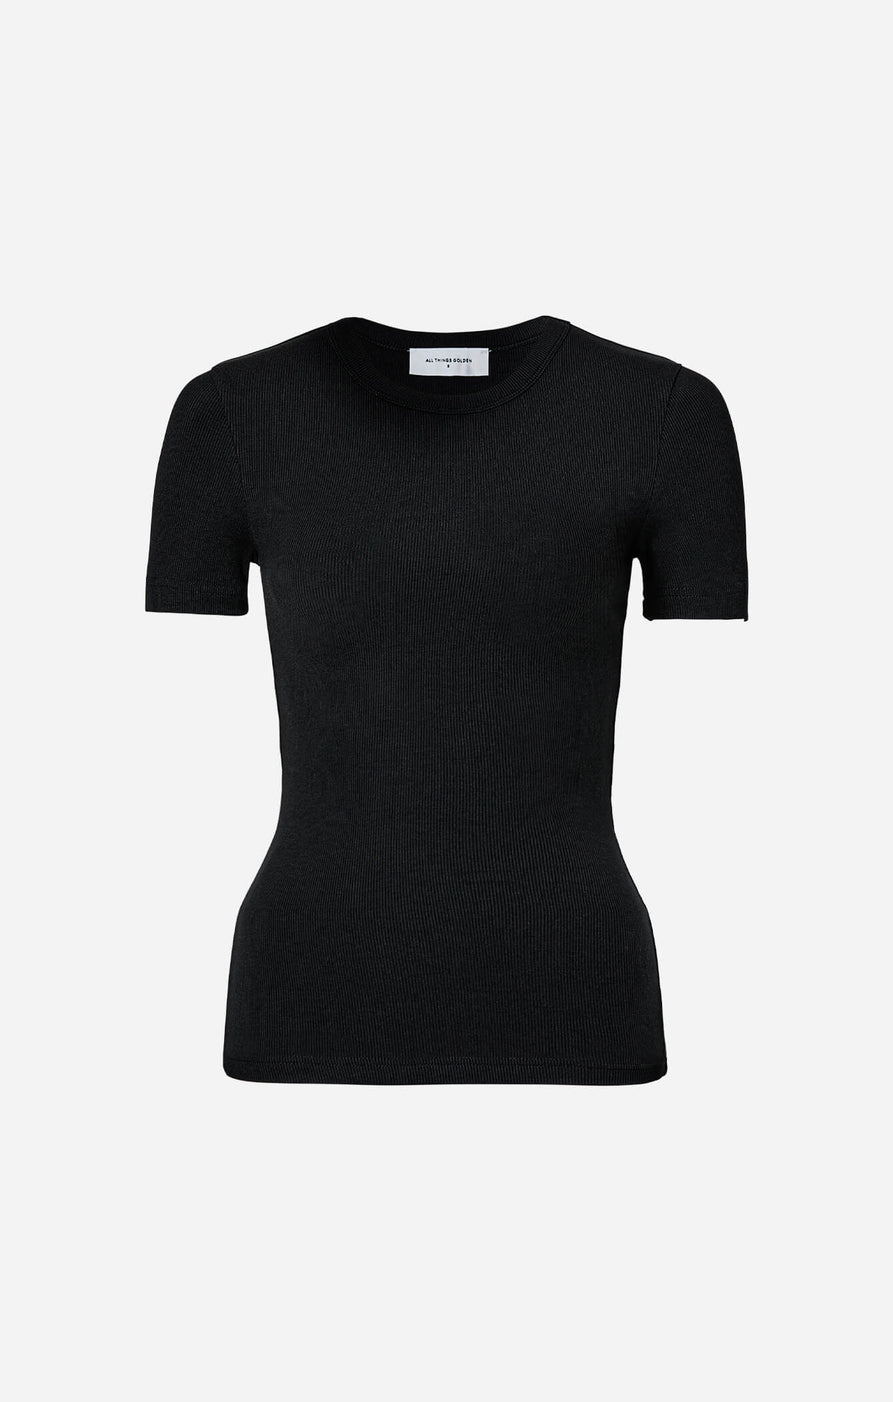 THE LUXE RIB BABY TEE - BLACK – All Things Golden